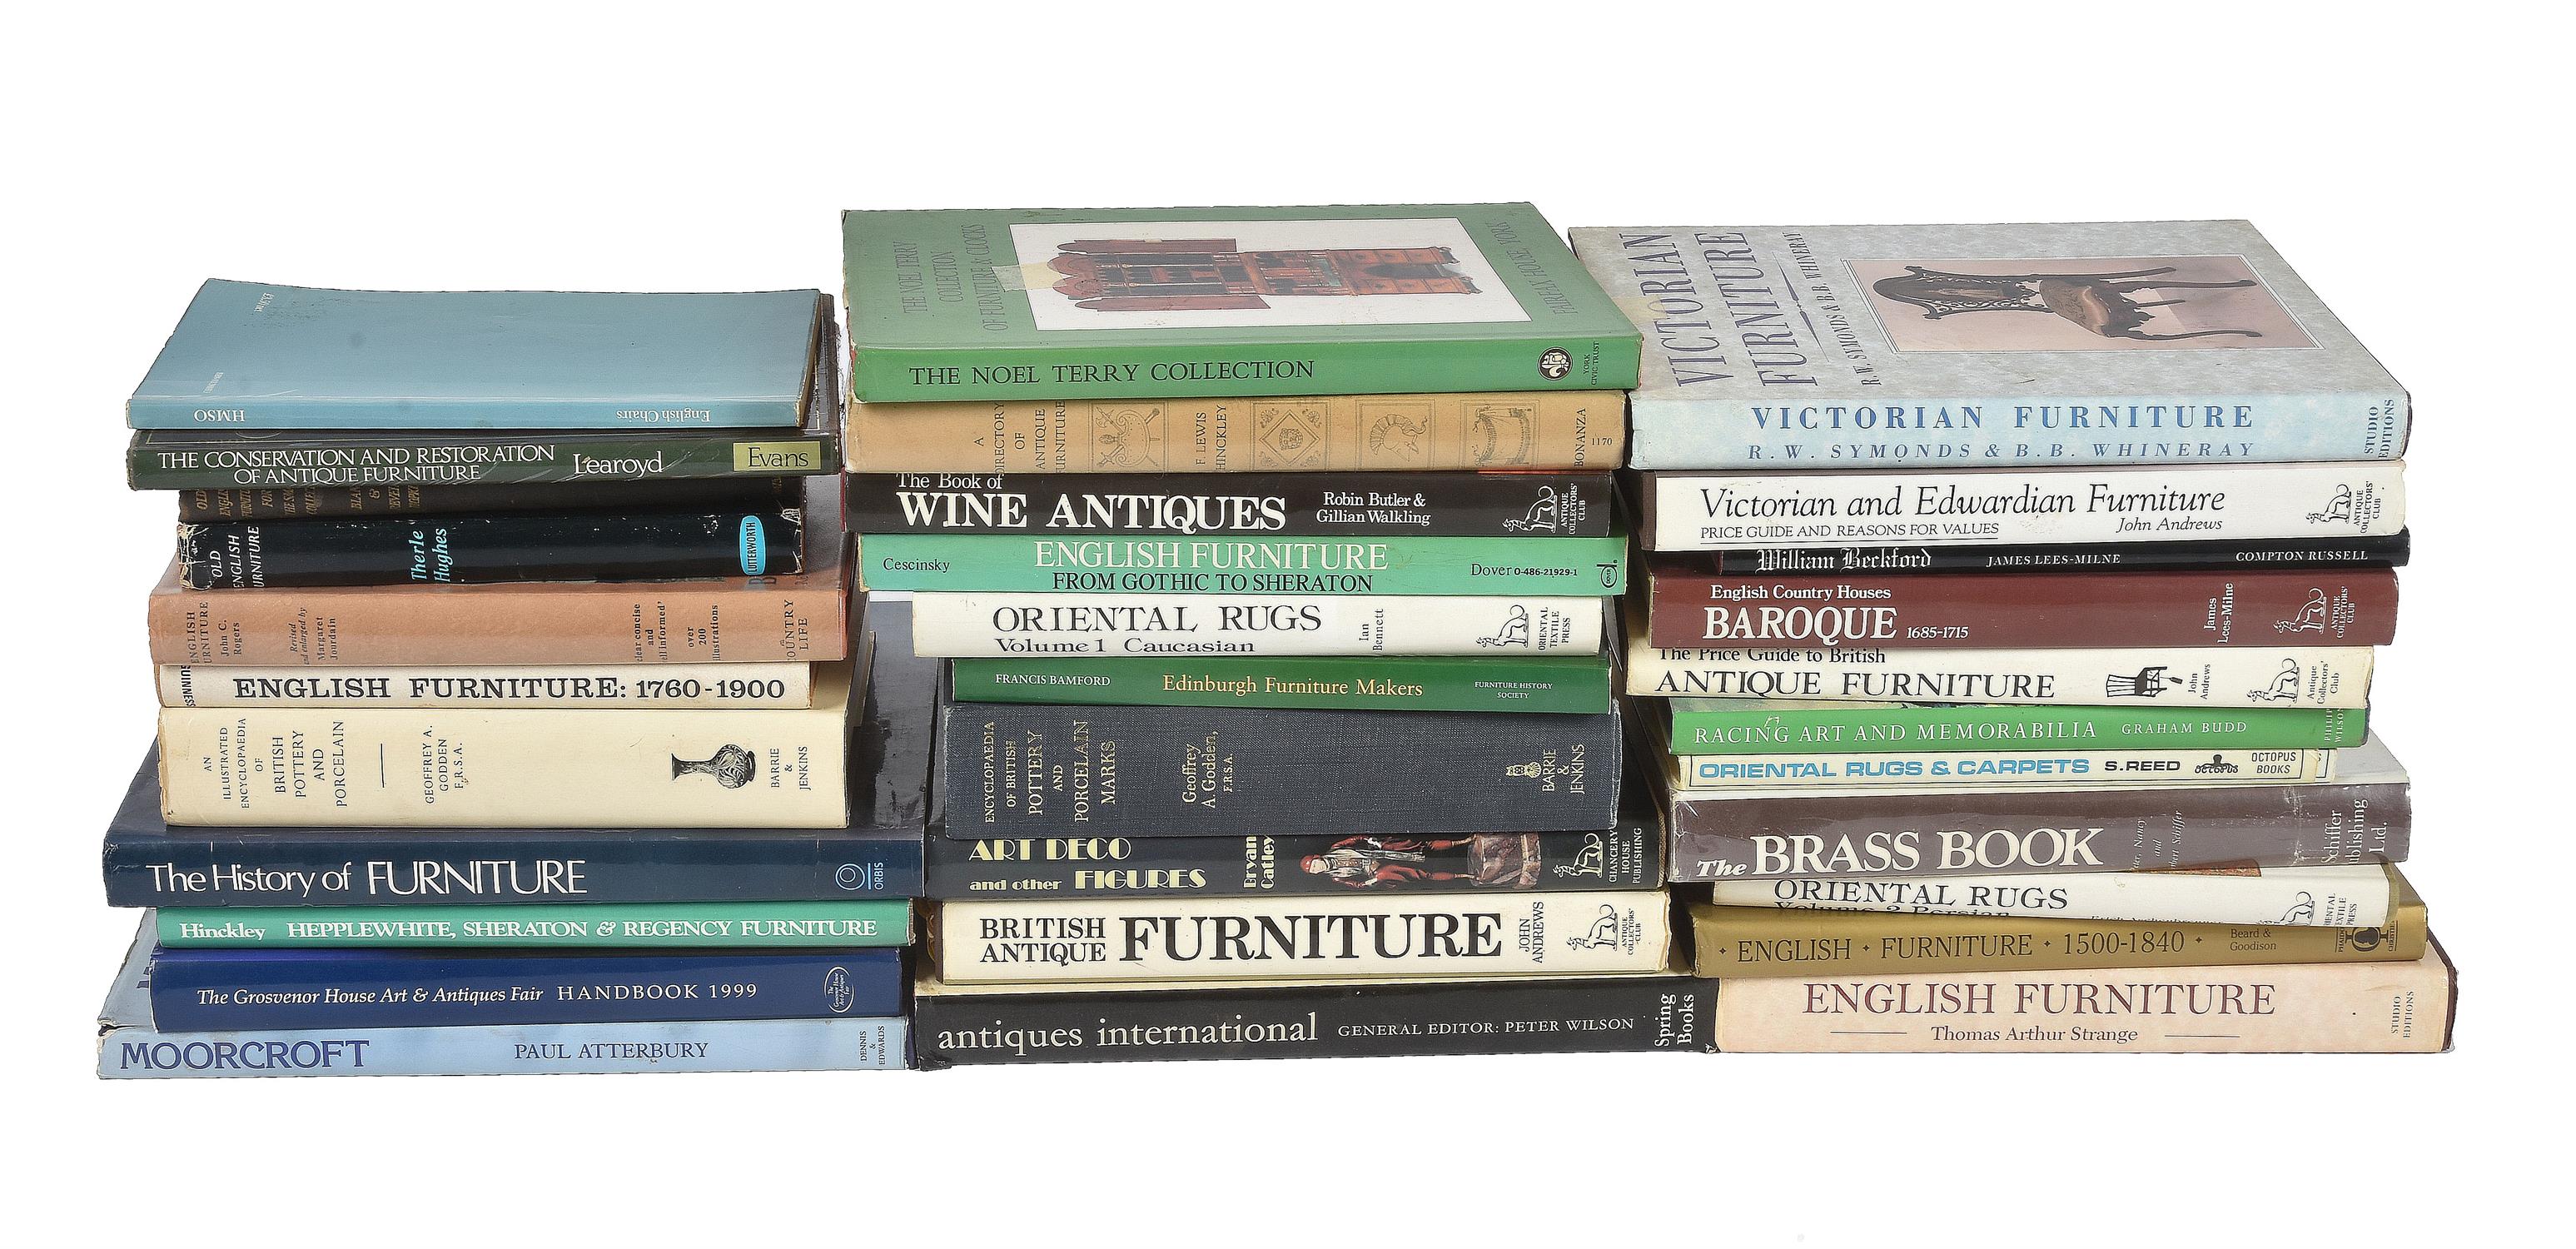 Ɵ A collection of approximately 30 reference books on antiques